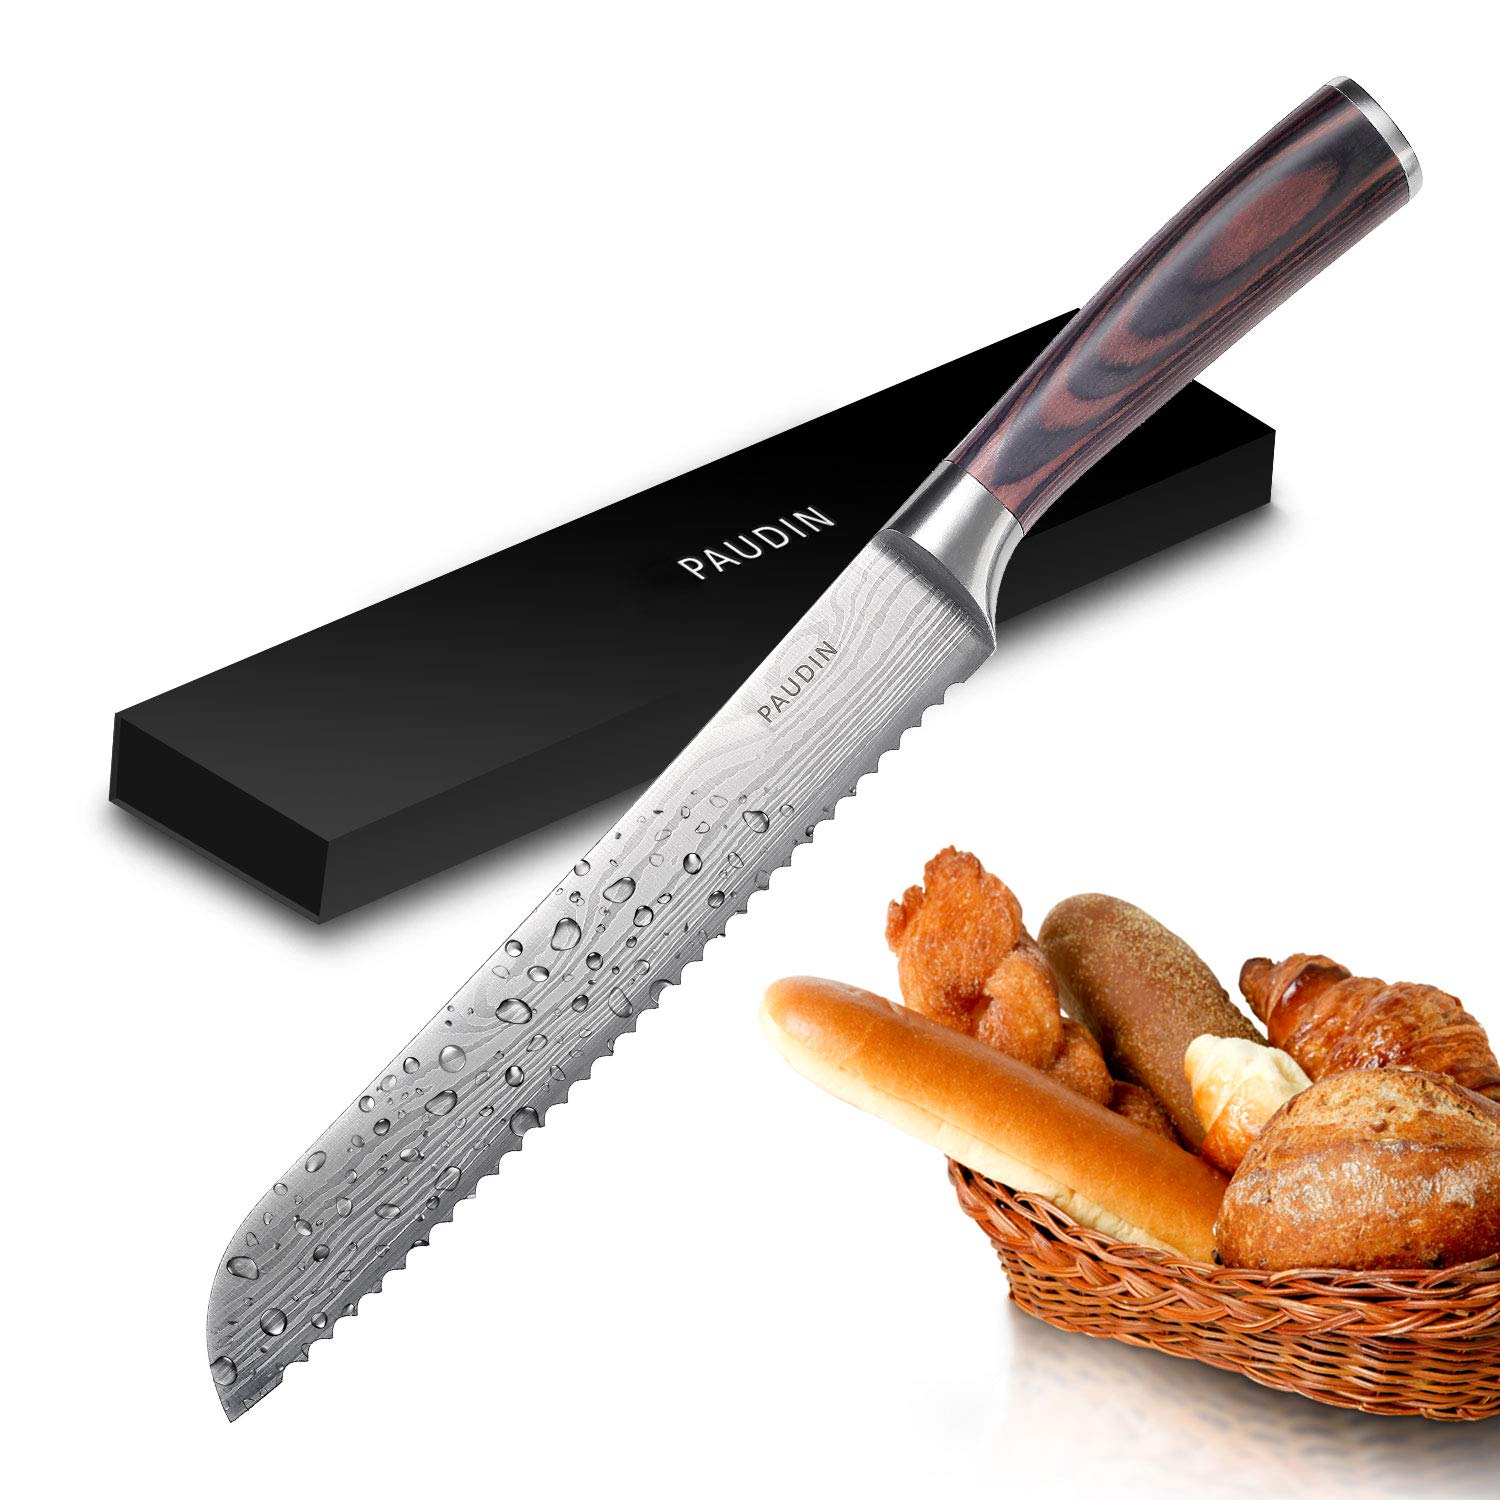 6. PAUDIN 8 Inches Serrated Bread Knife 